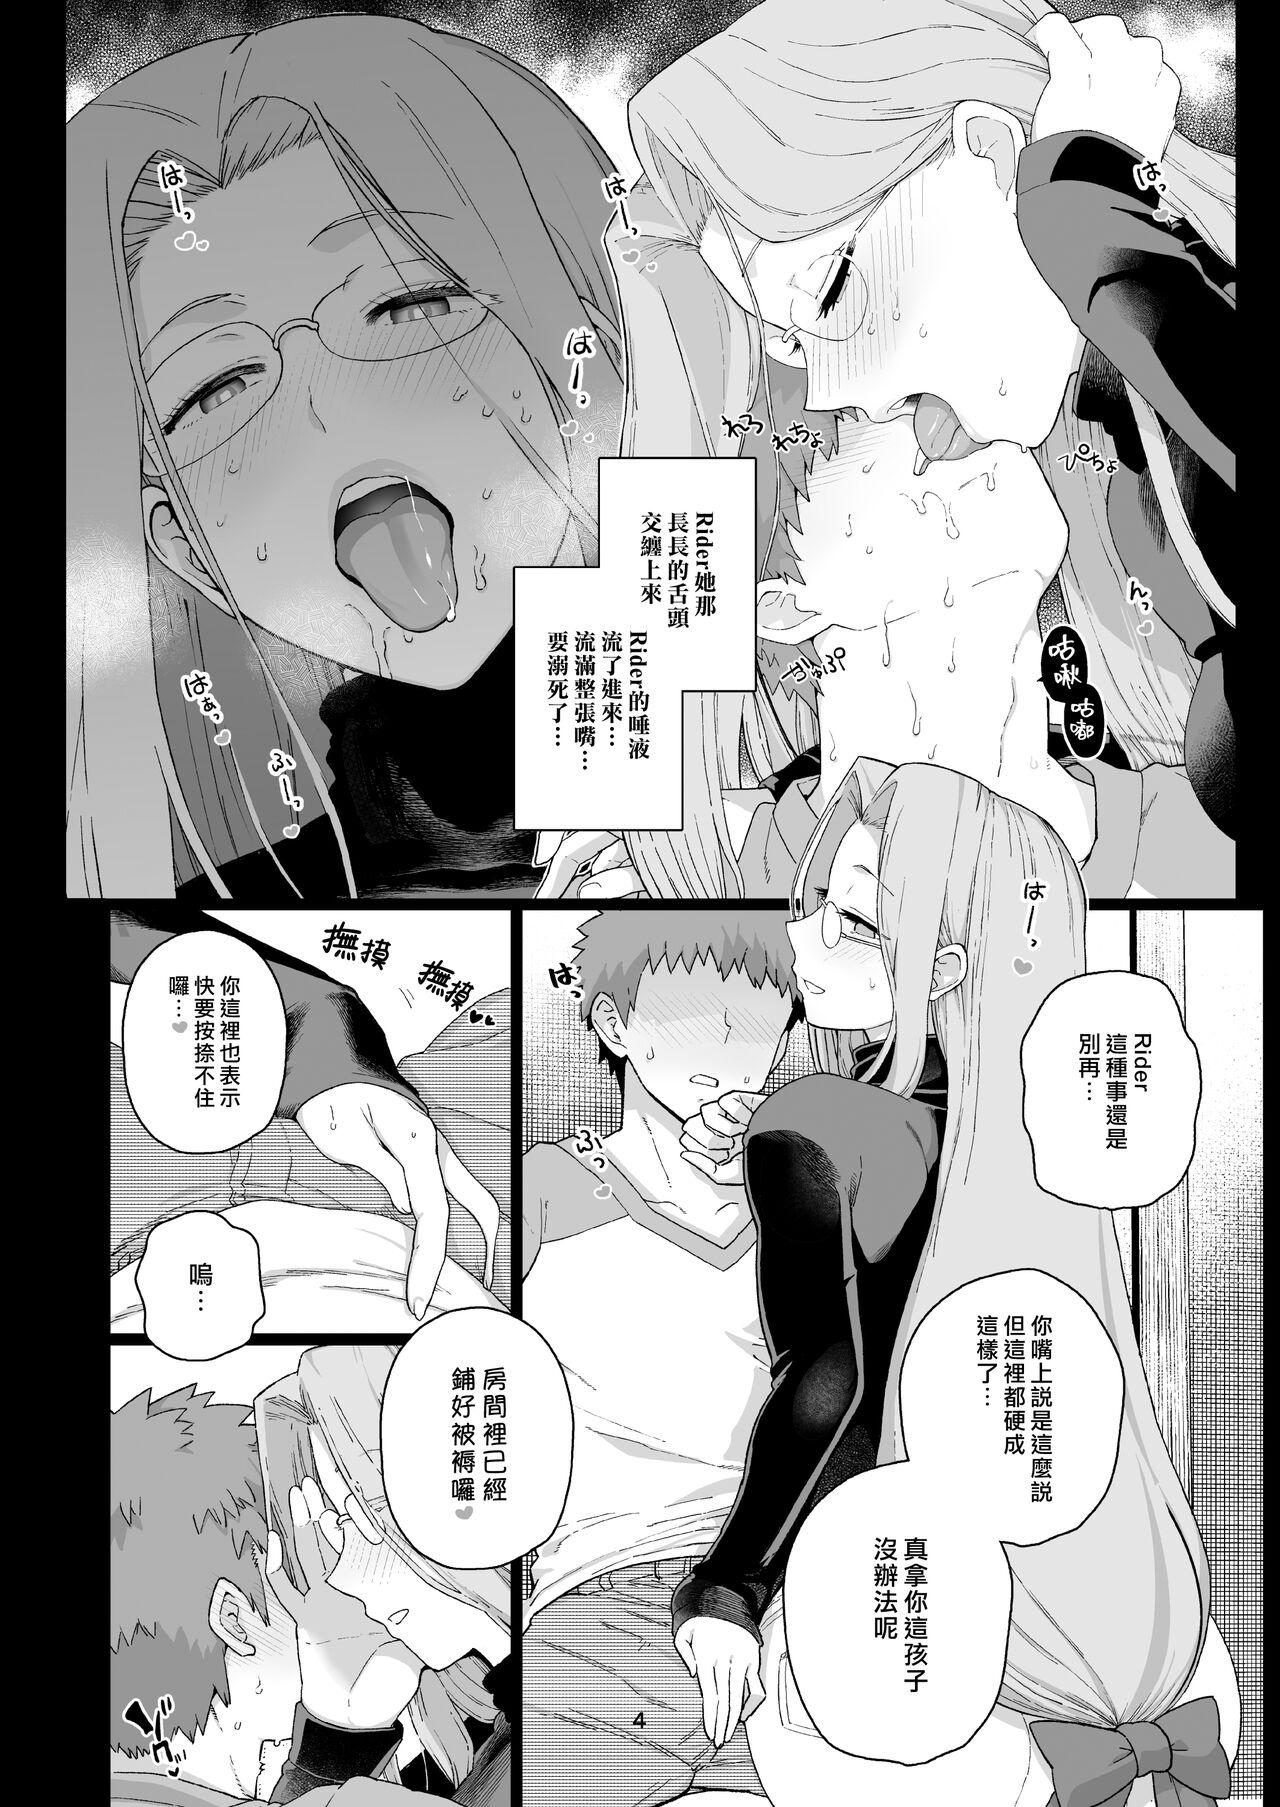 Gapes Gaping Asshole Rider-san no Tsumamigui - Fate stay night Youporn - Page 5